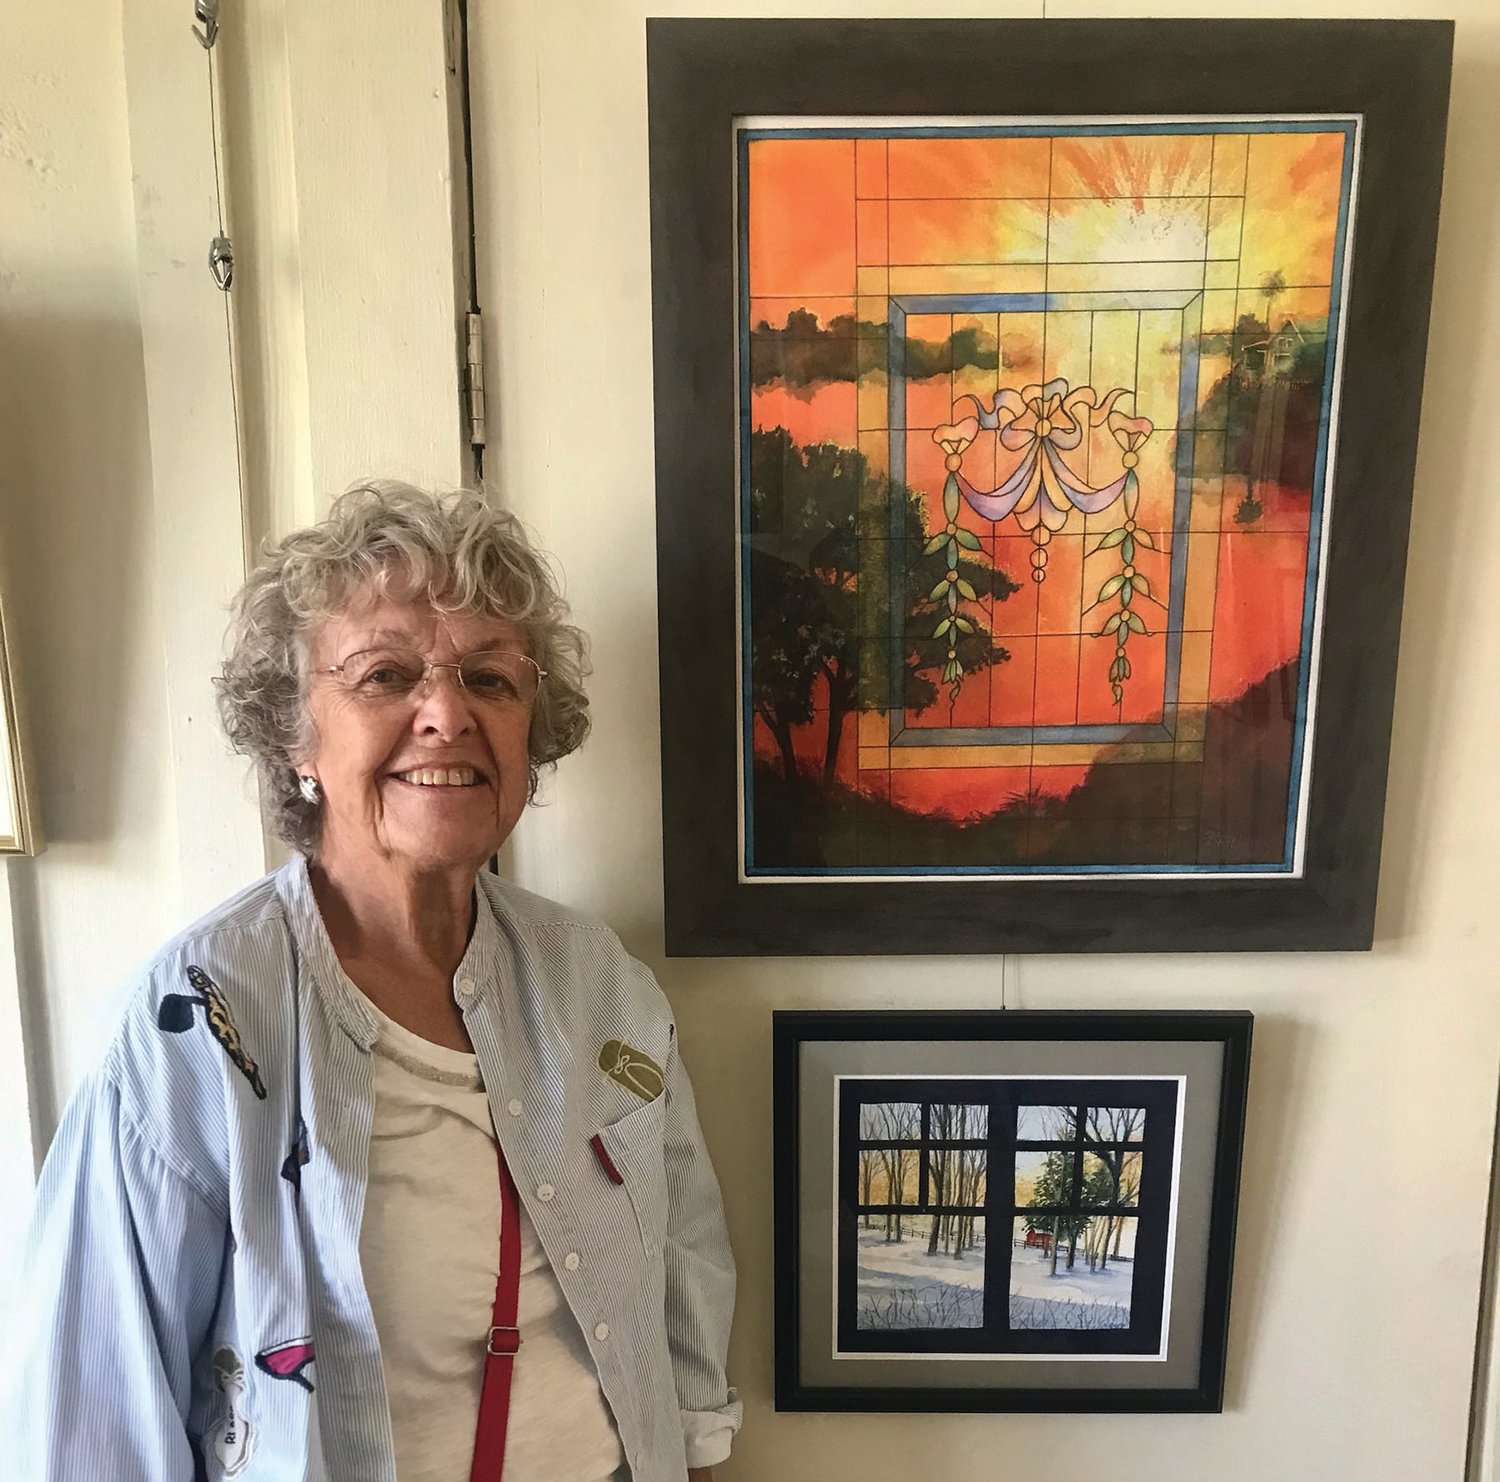 Sharon Rapp is the Artist of the Month at the LaBelle Gallery and Cultural Center.